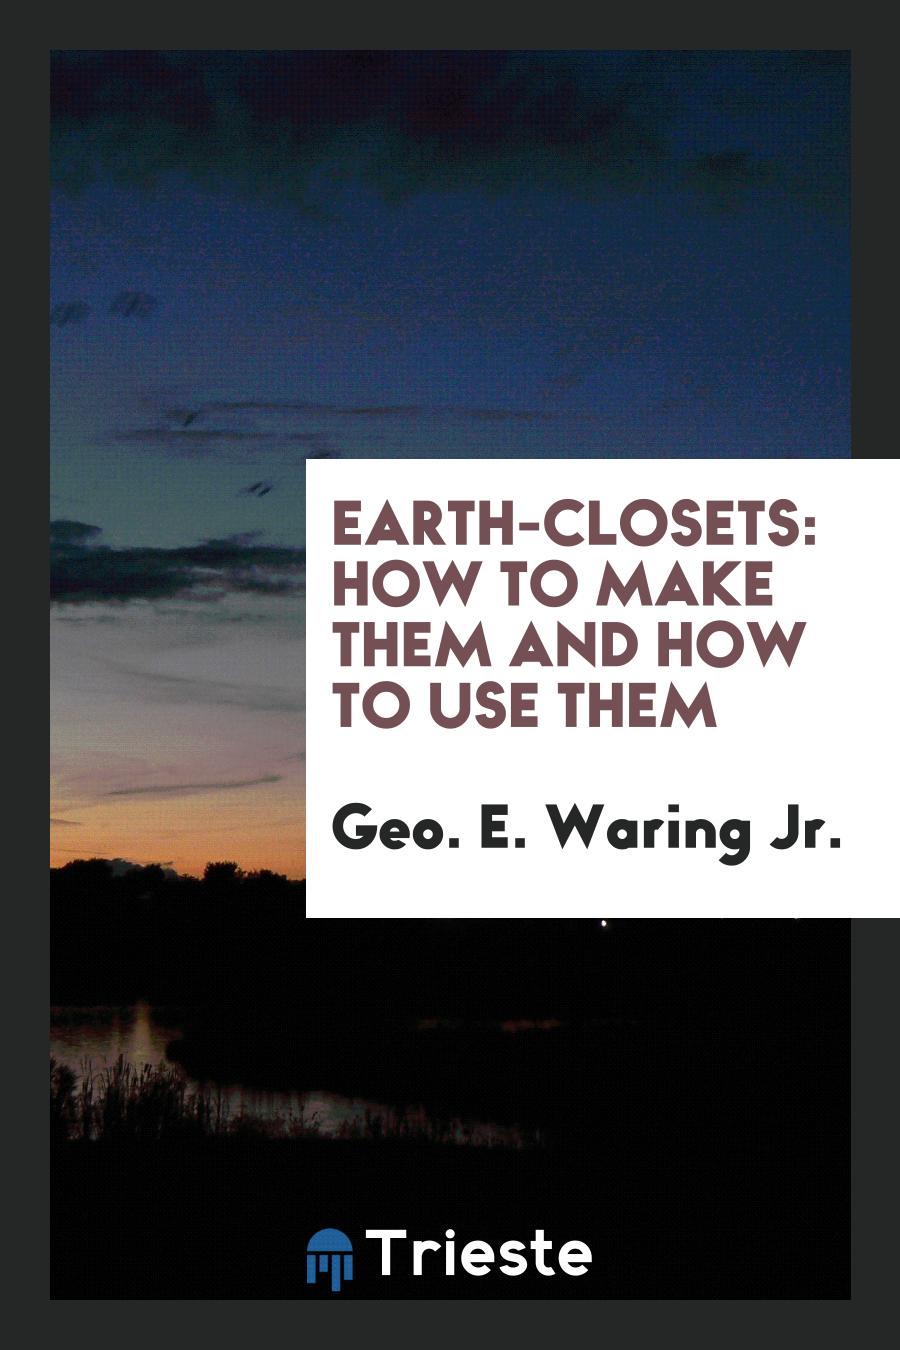 Earth-closets: How to make them and how to use them